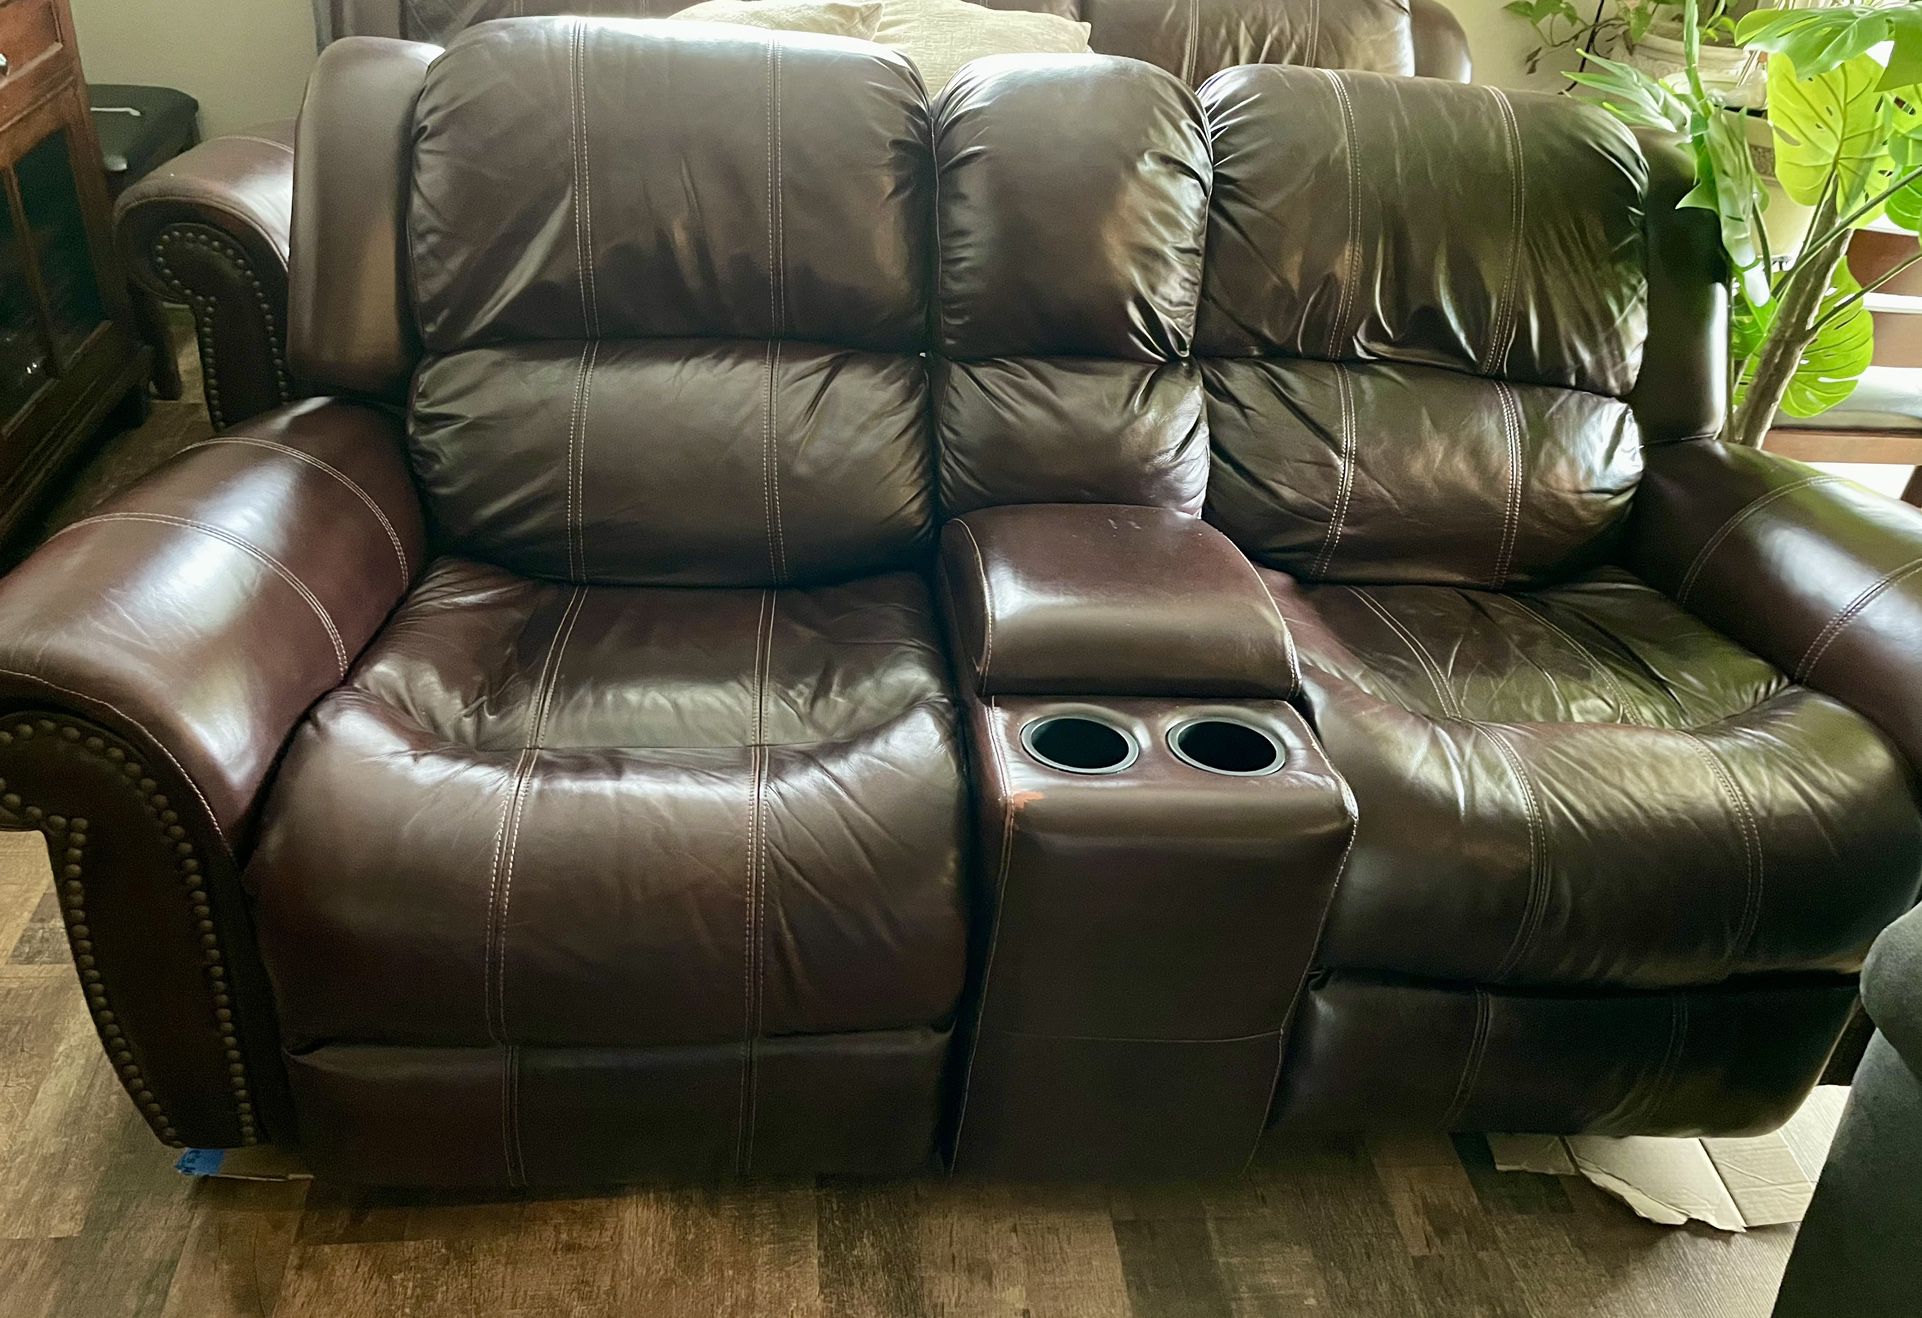 Sofa and Loveseat Recliners 